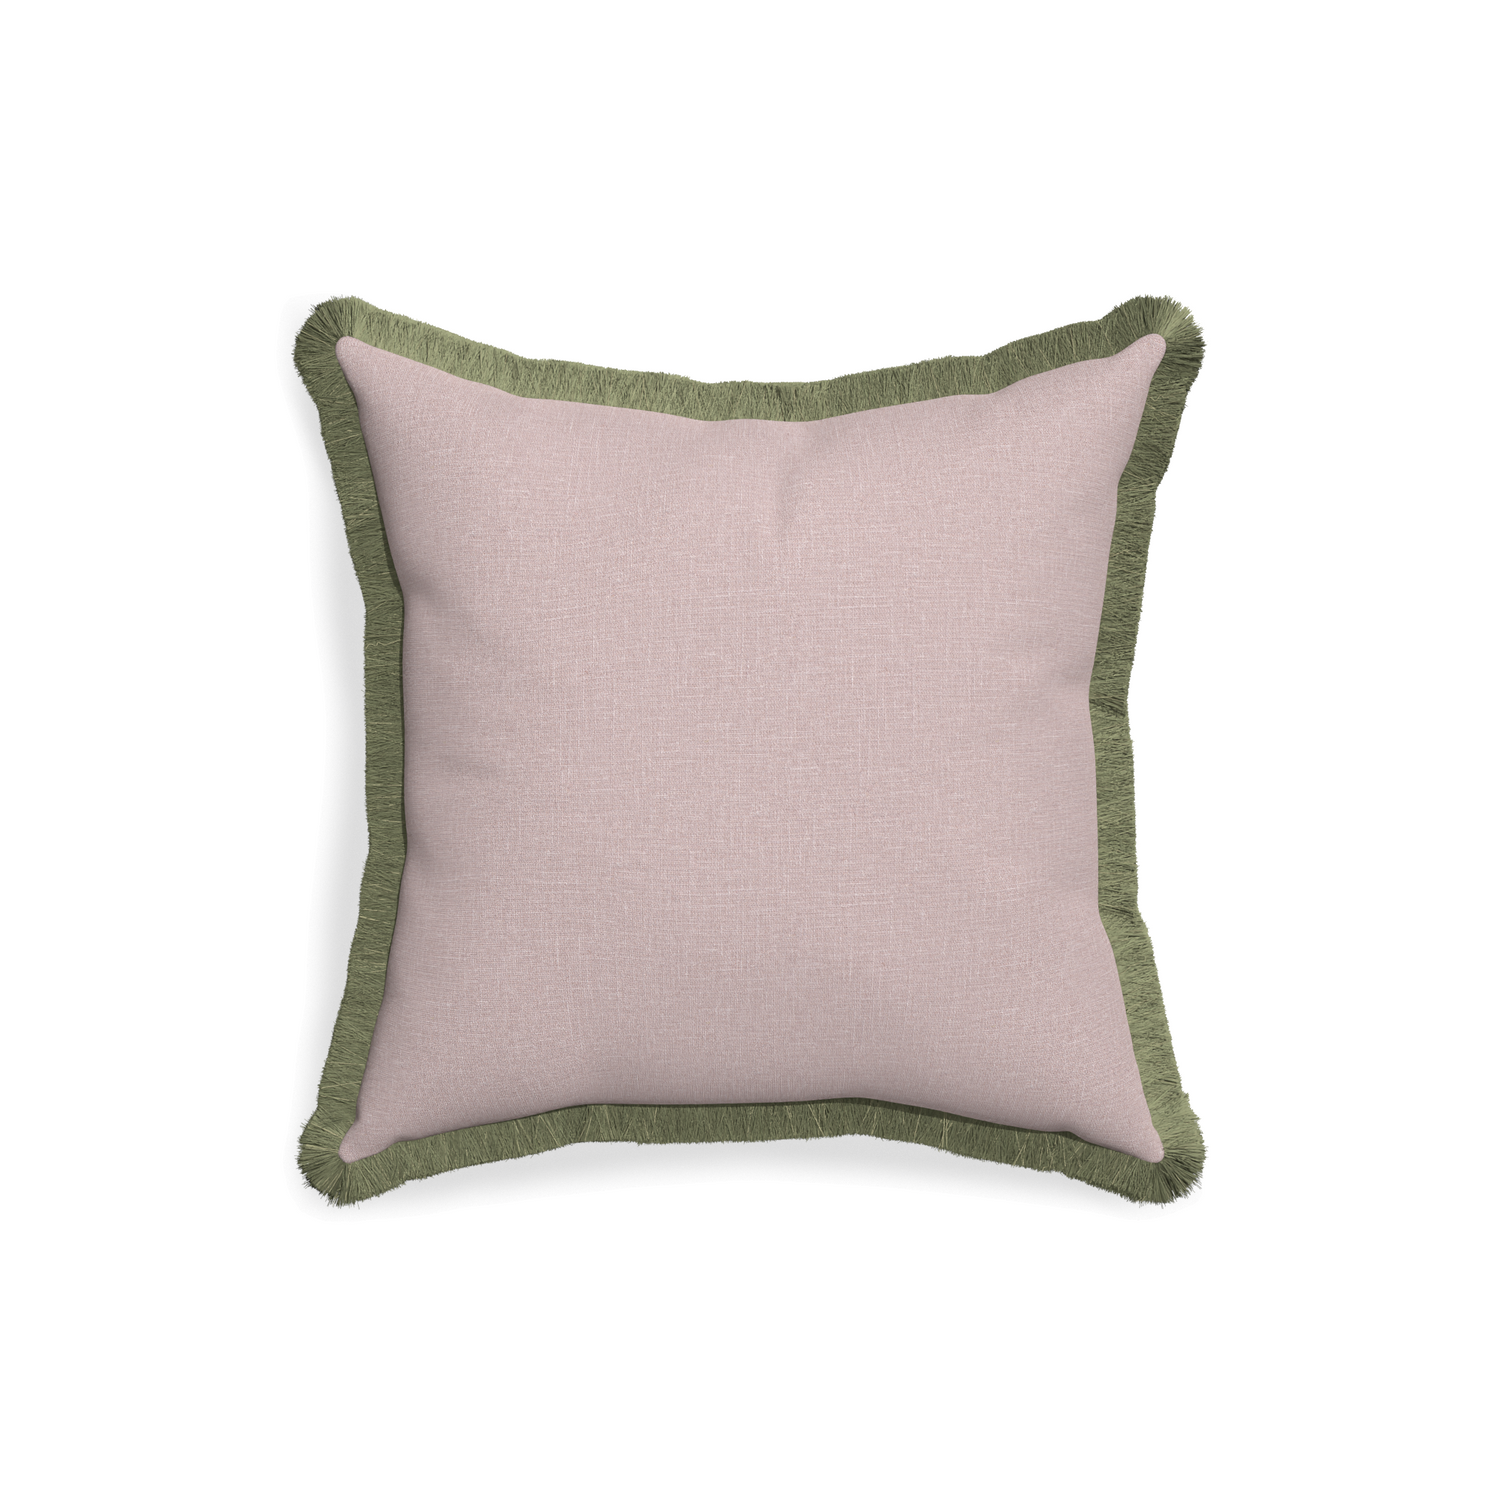 18-square orchid custom mauve pinkpillow with sage fringe on white background